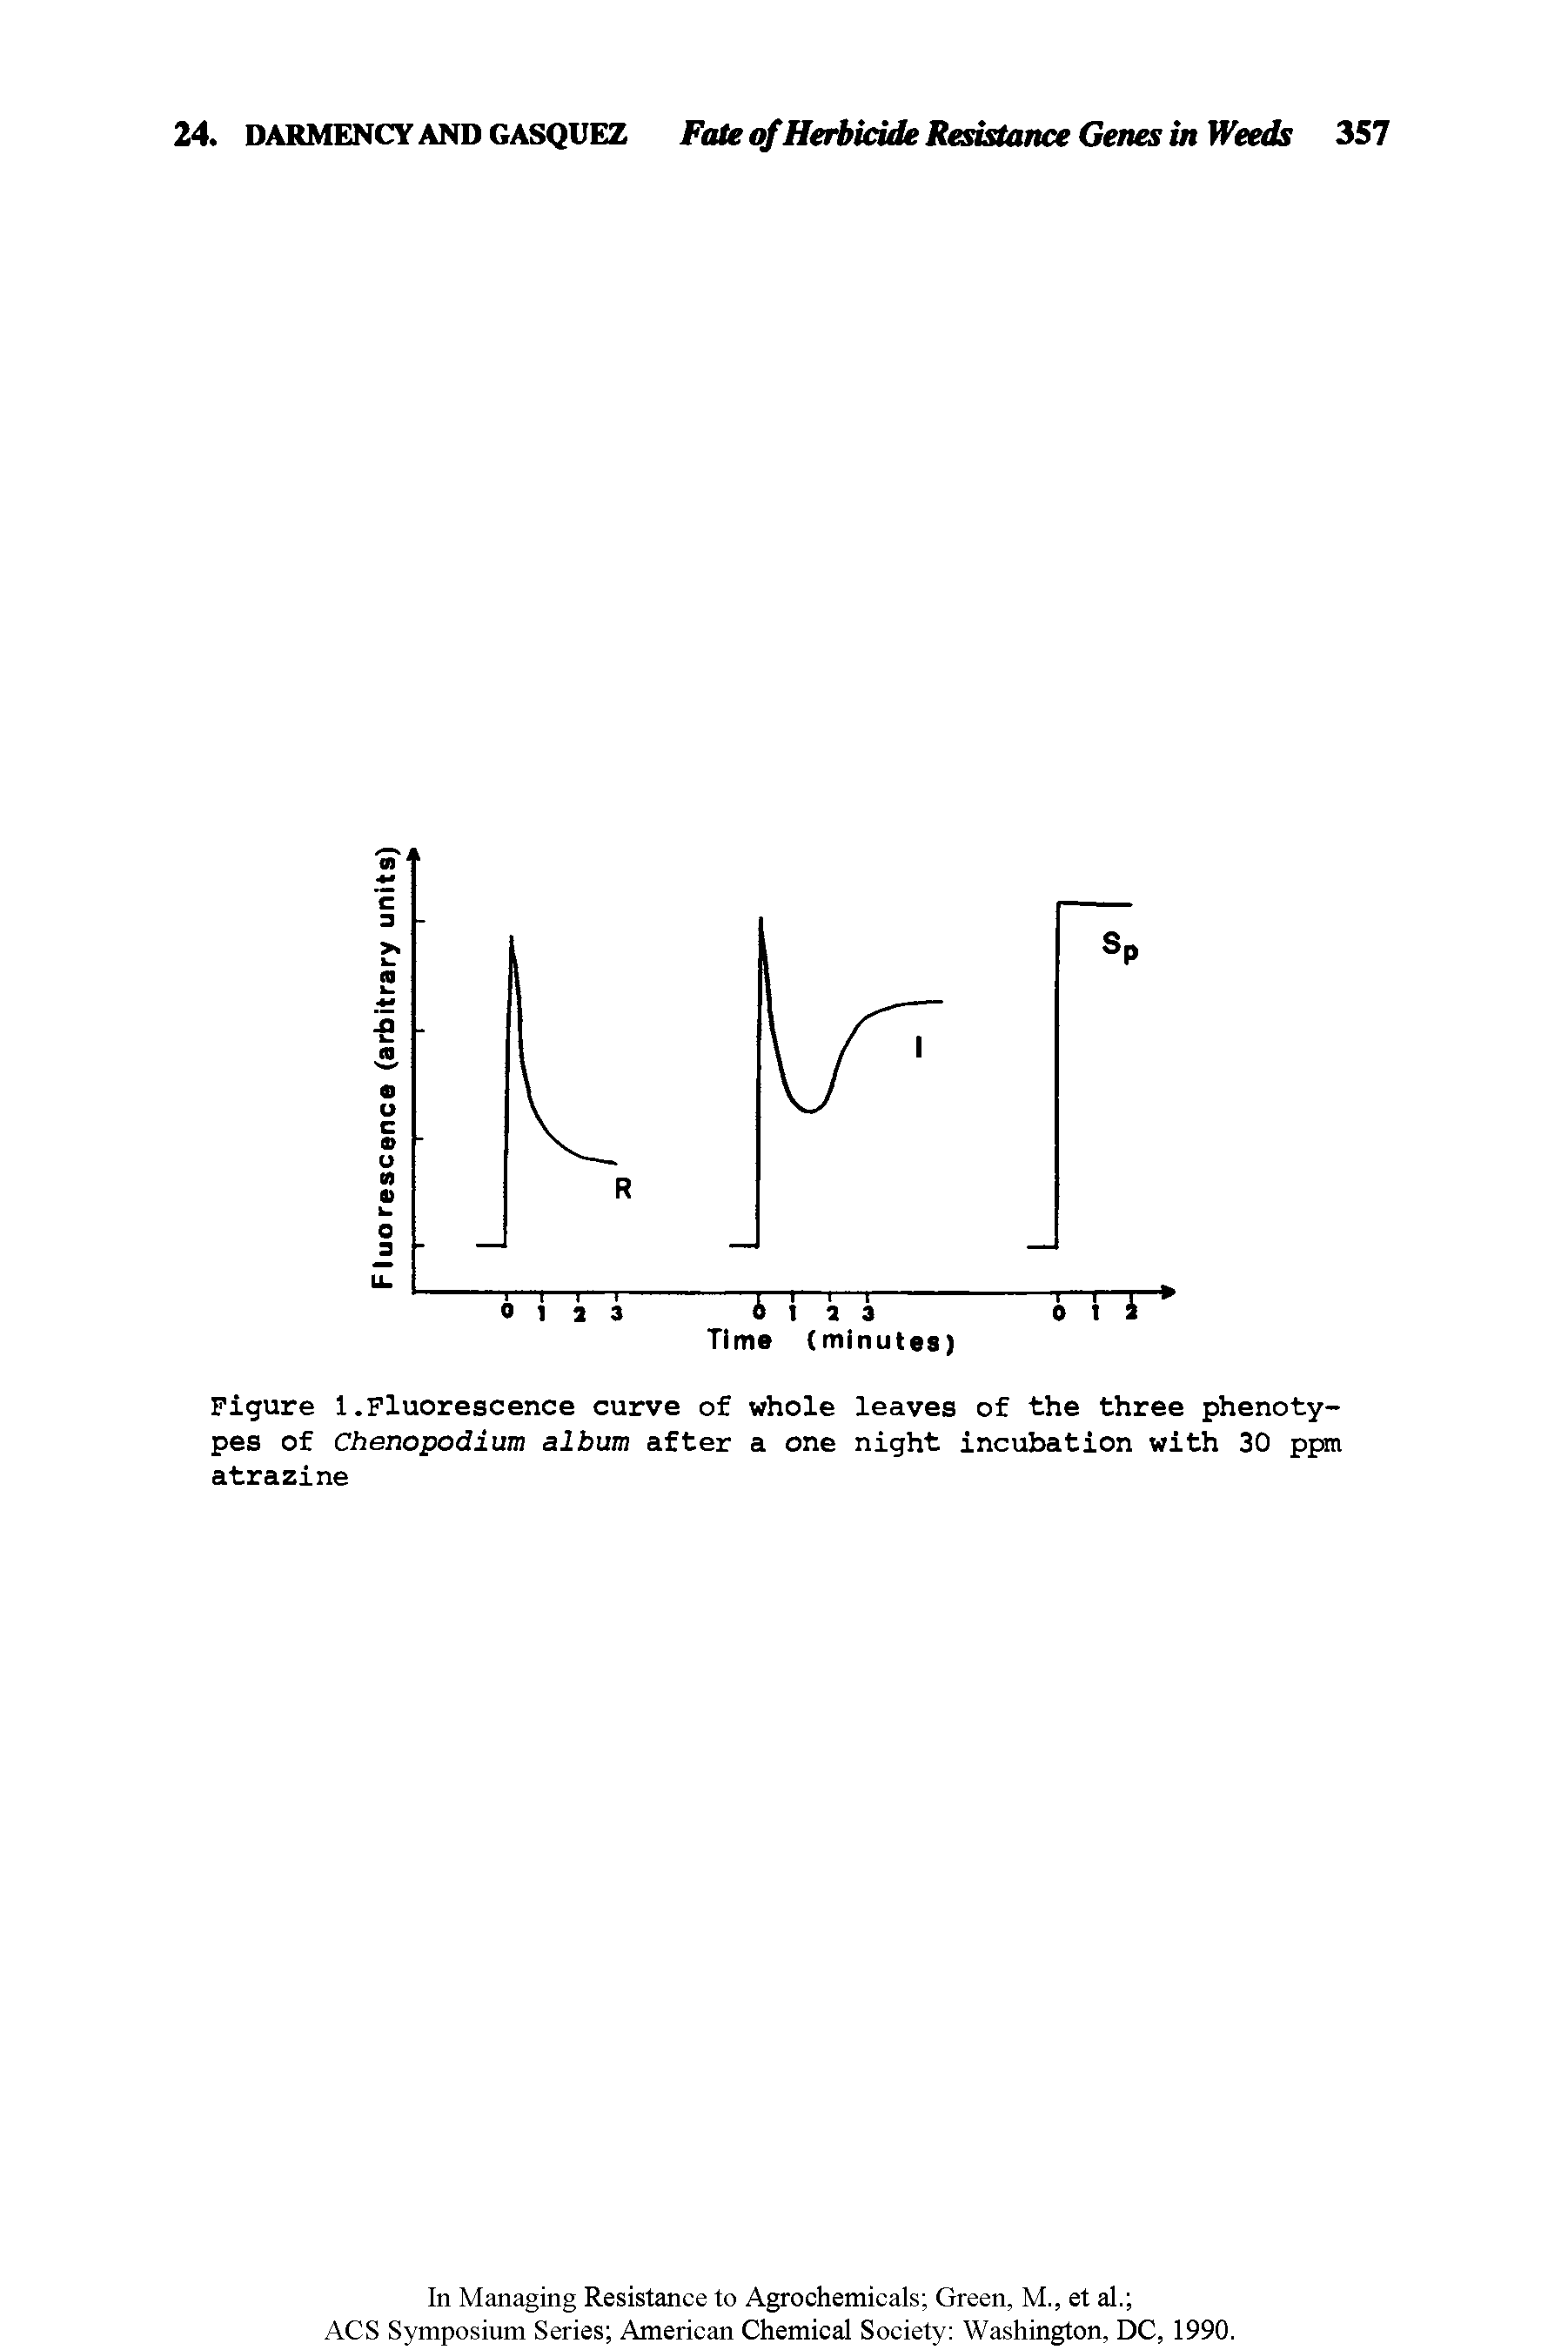 Figure 1.Fluorescence curve of whole leaves of the three phenotypes of Chenopodium album after a one night incubation with 30 ppm atrazine...